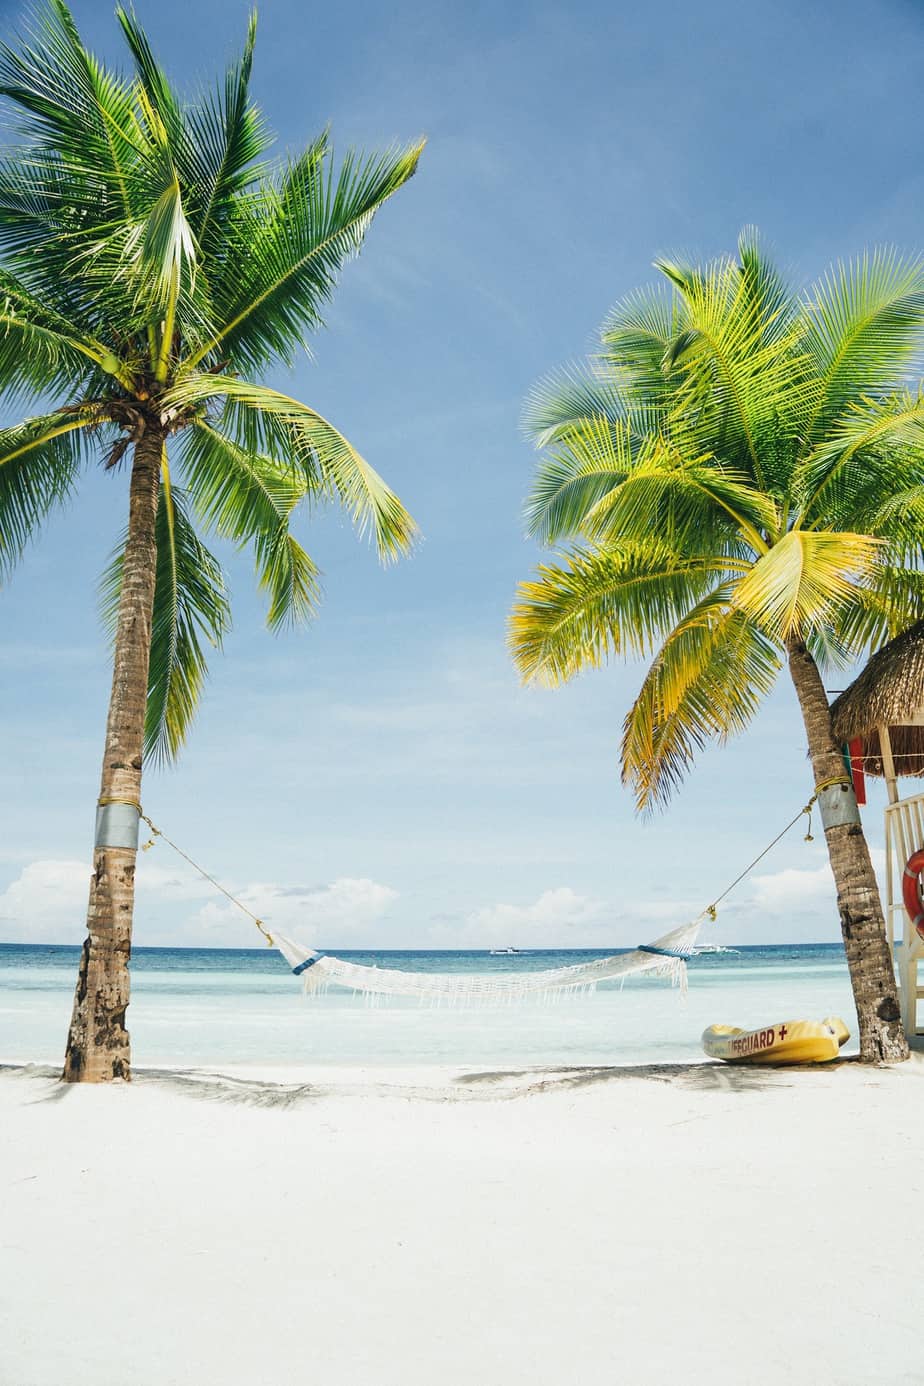 MCI > Basseterre, Saint Kitts and Nevis: Econ from $421. – Feb-Apr 